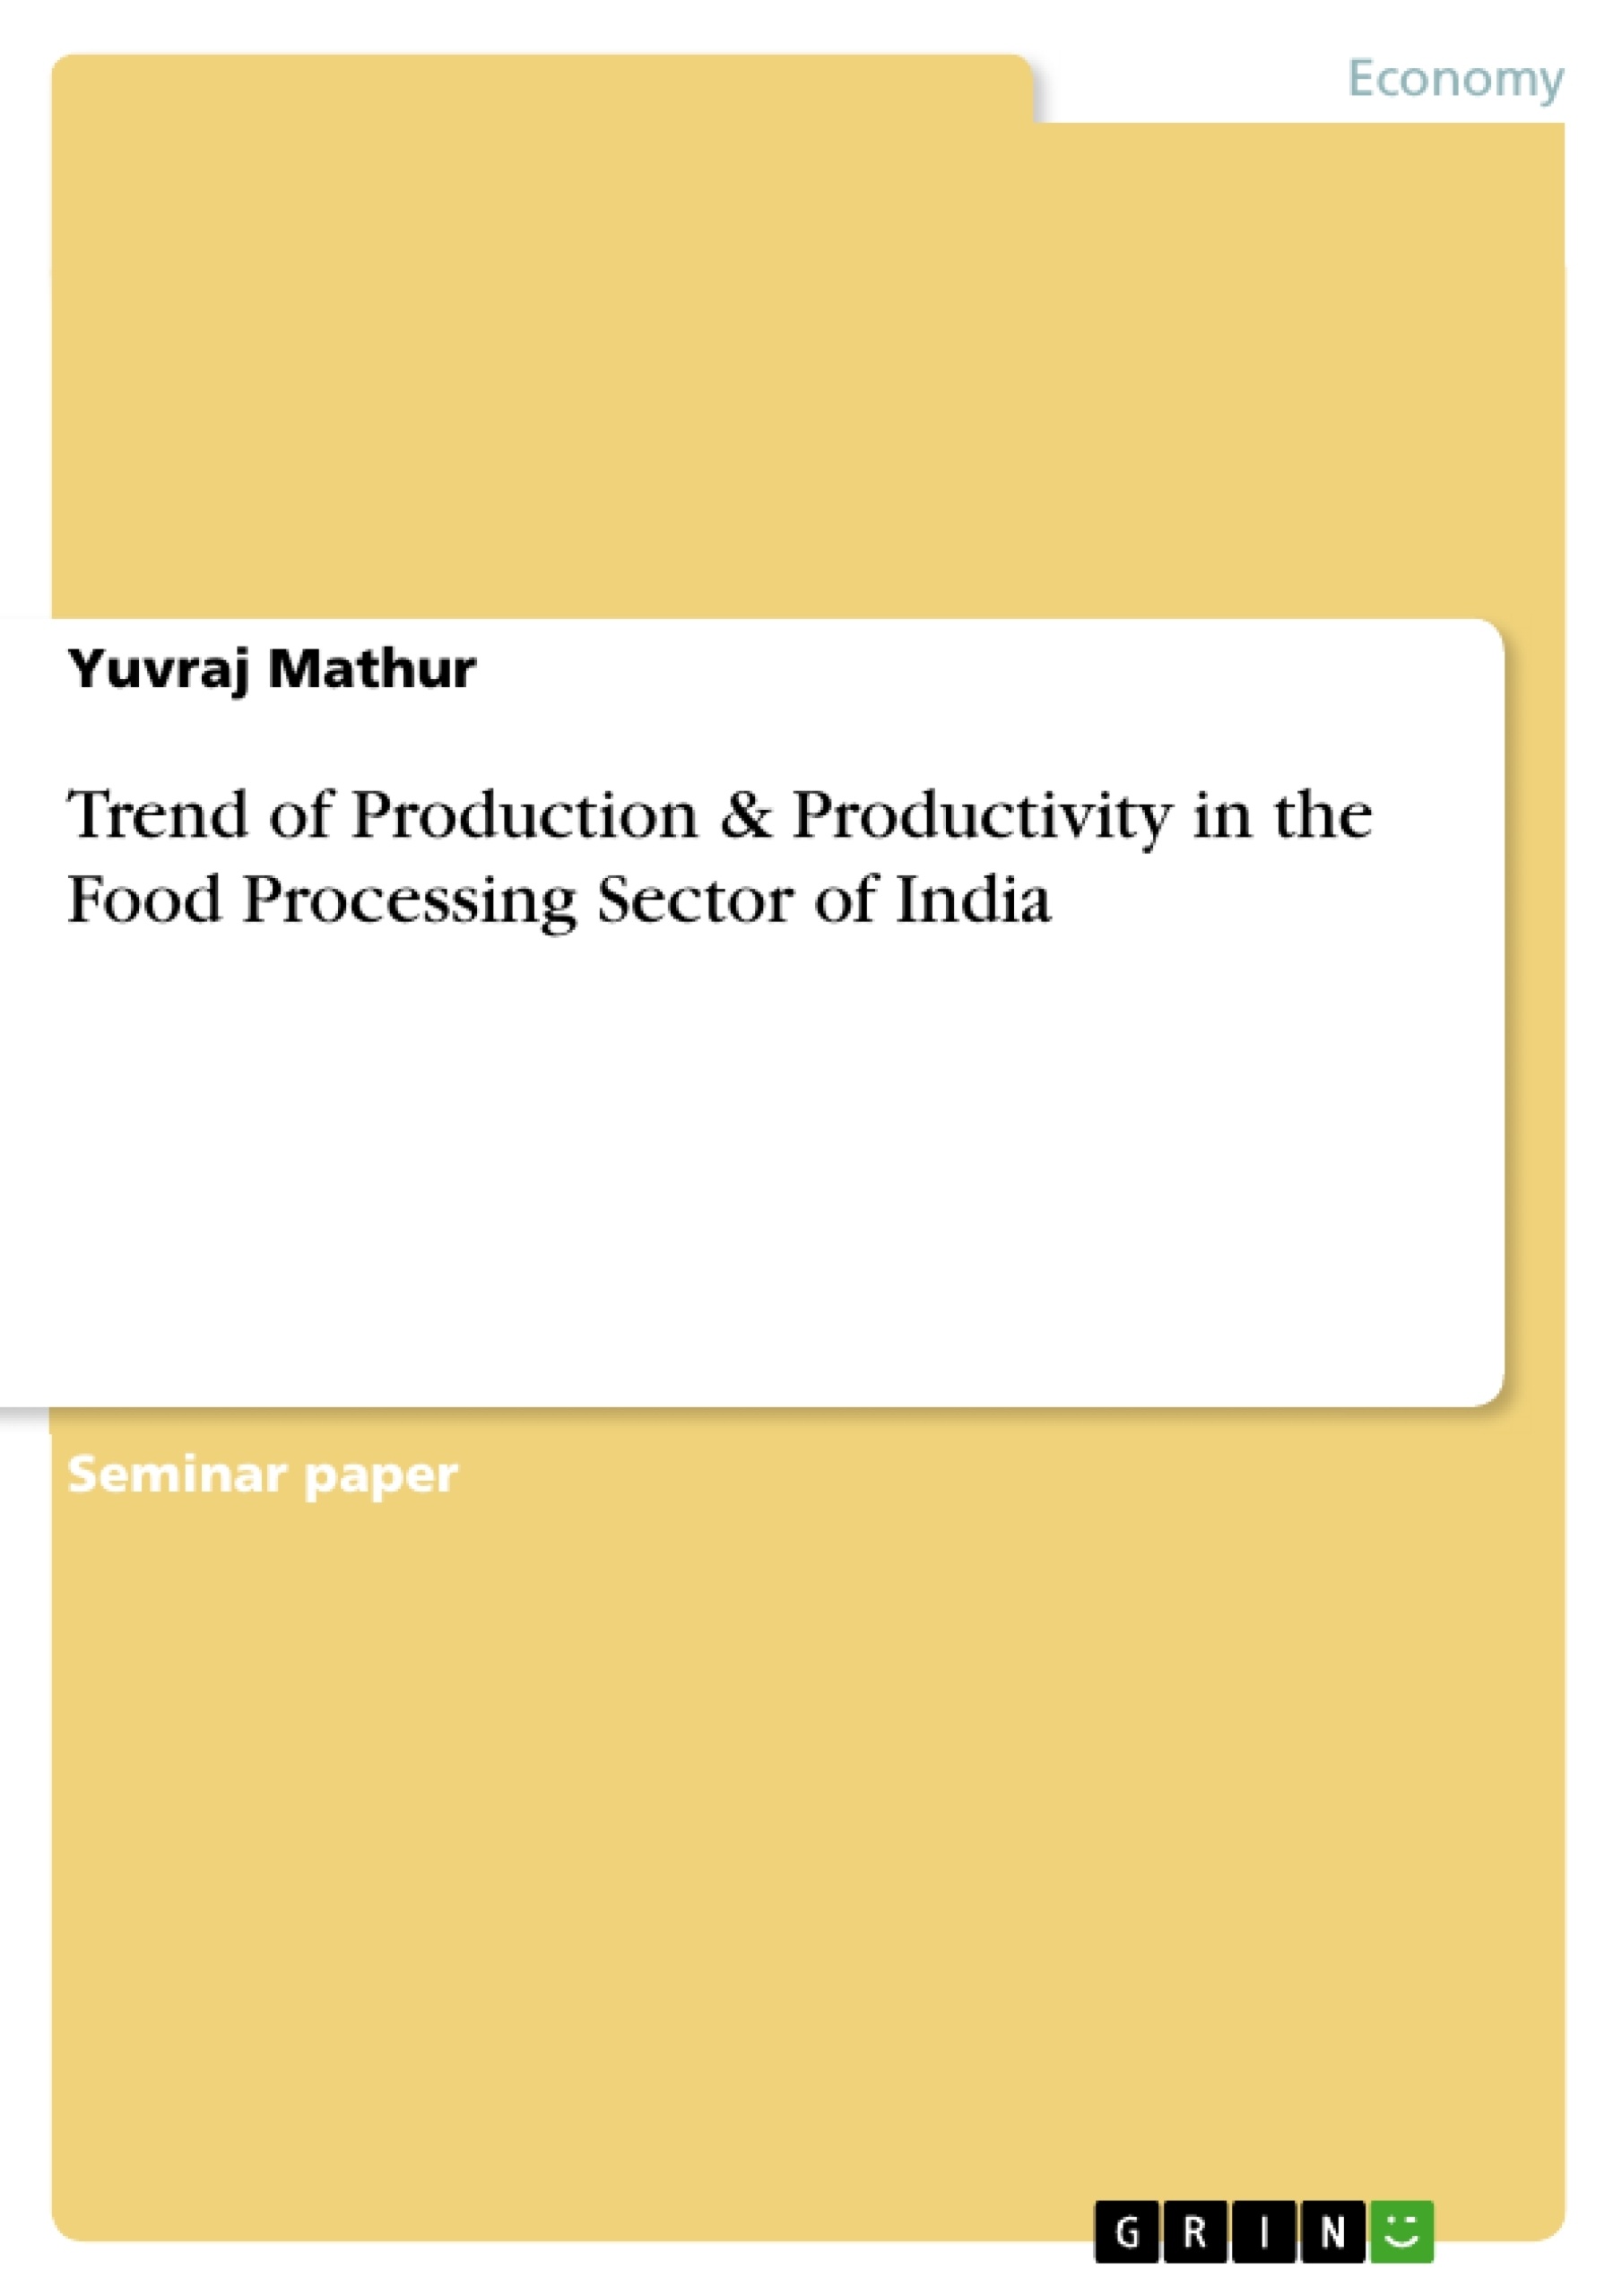 Title: Trend of Production & Productivity in the Food Processing Sector of India